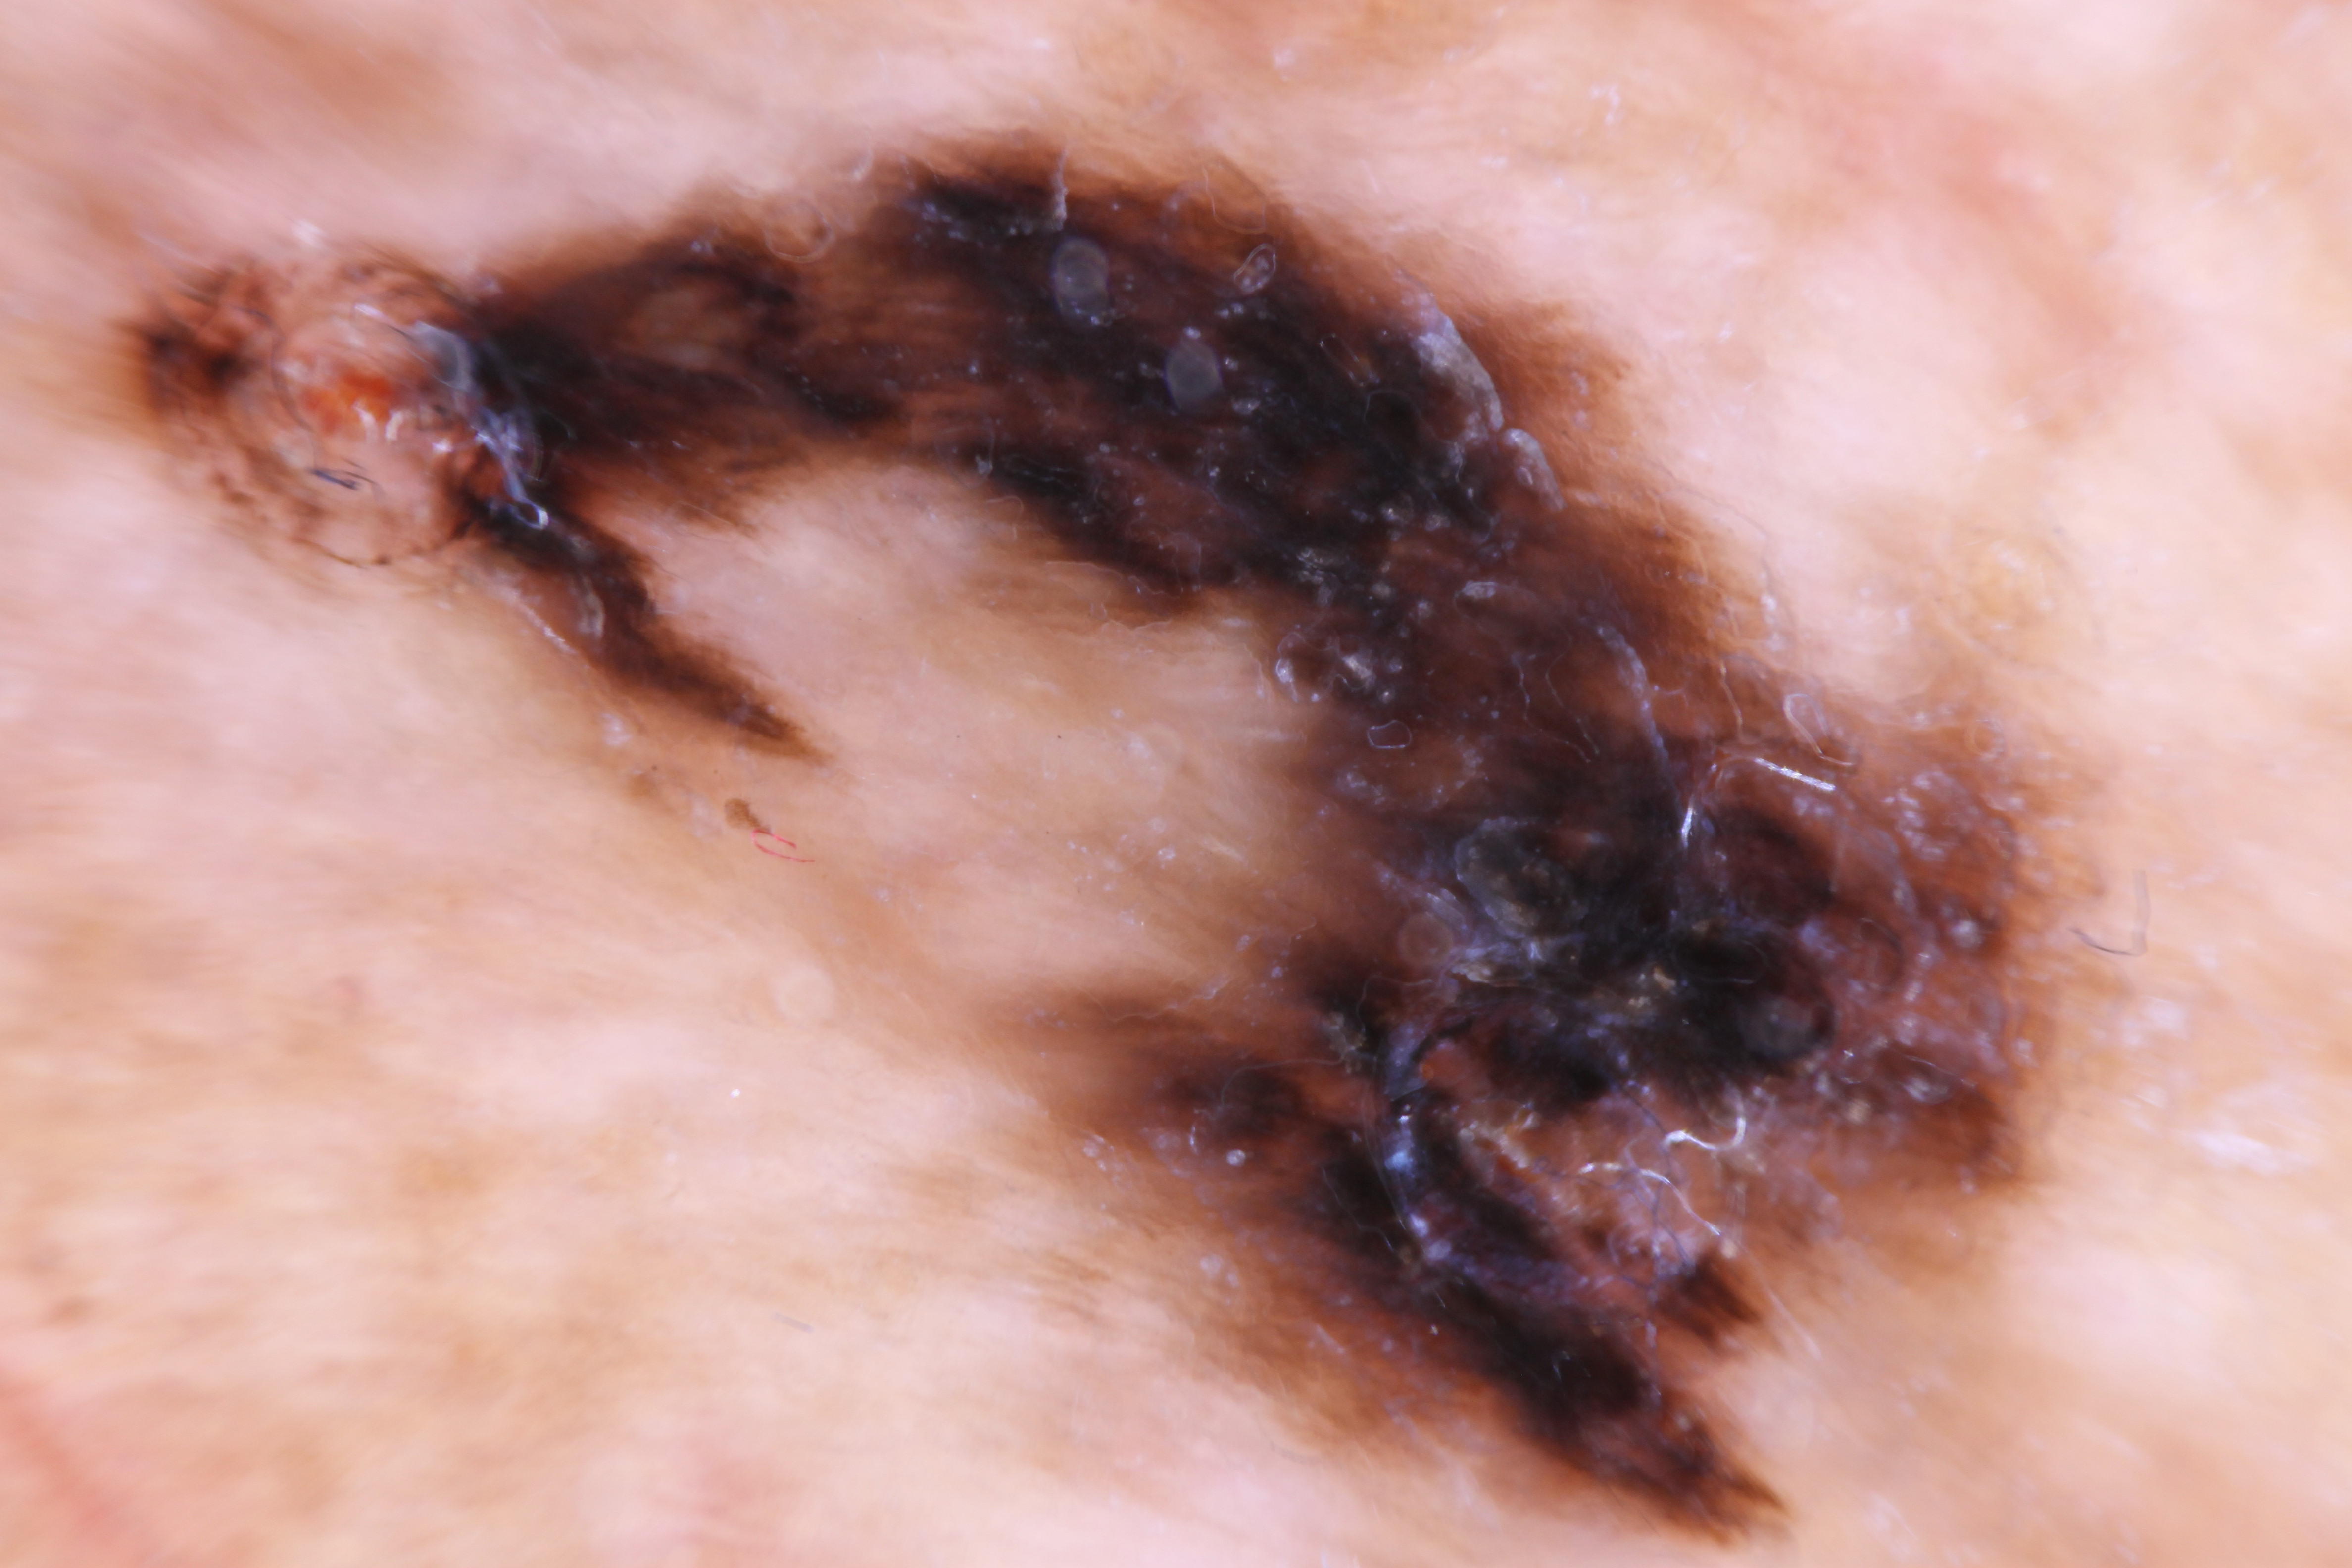 <p>Asymmetric Parallel Ridge Dermoscopic Pattern Indicative of Acral Lentiginous Melanoma on the Heel of a 62-Year-Old Male